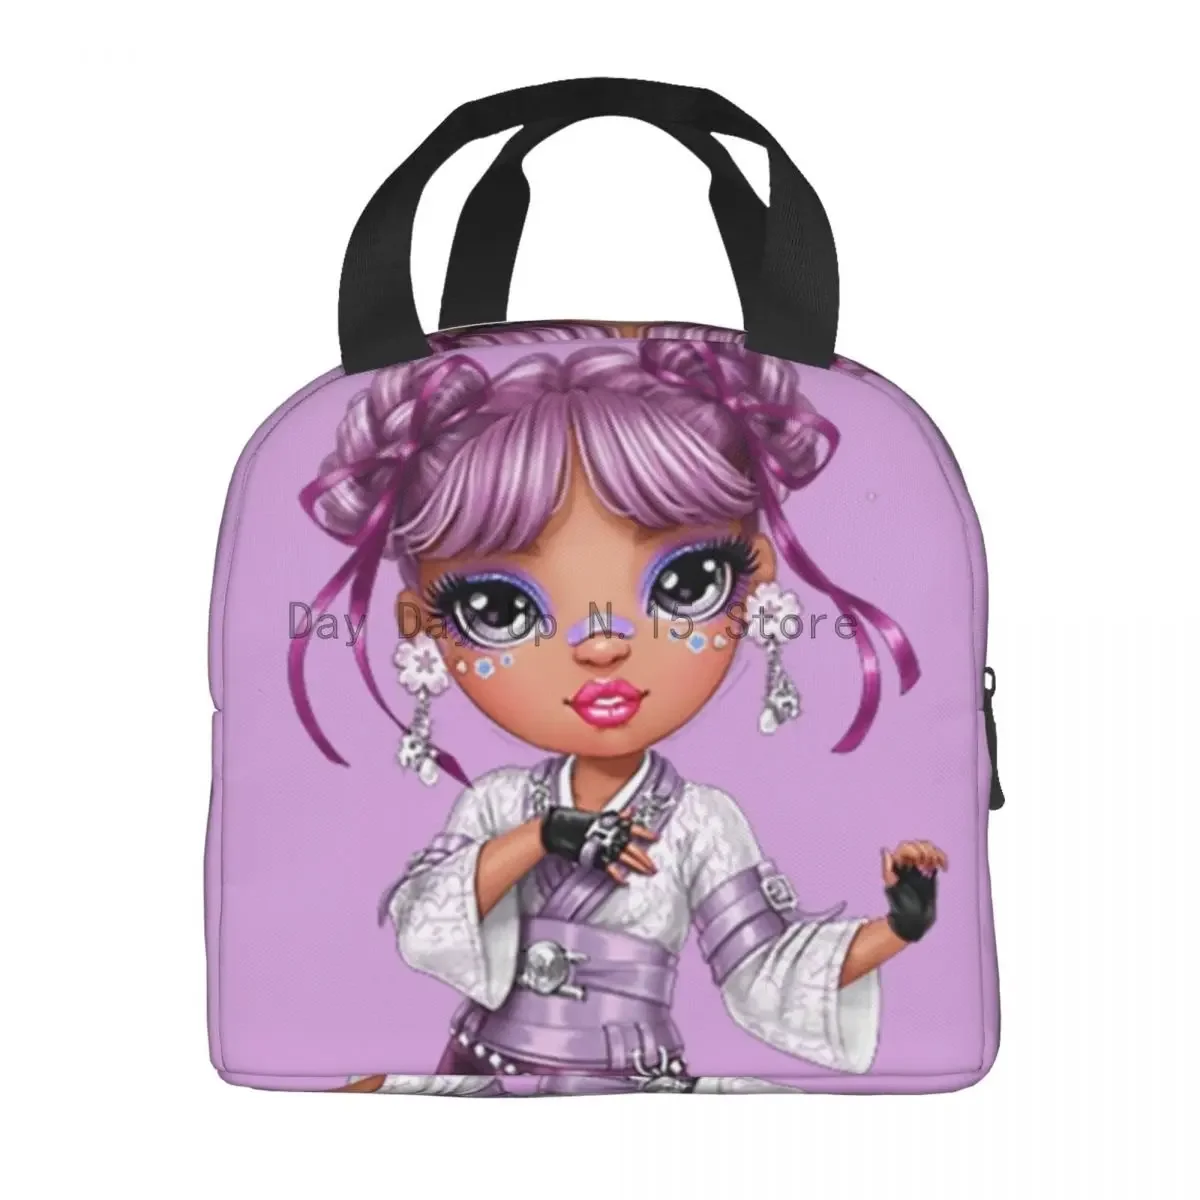 Rainbow High Lila Yamamoto Portable Lunch Box Multifunction Thermal Cooler Food Insulated Lunch Bag School Children Student